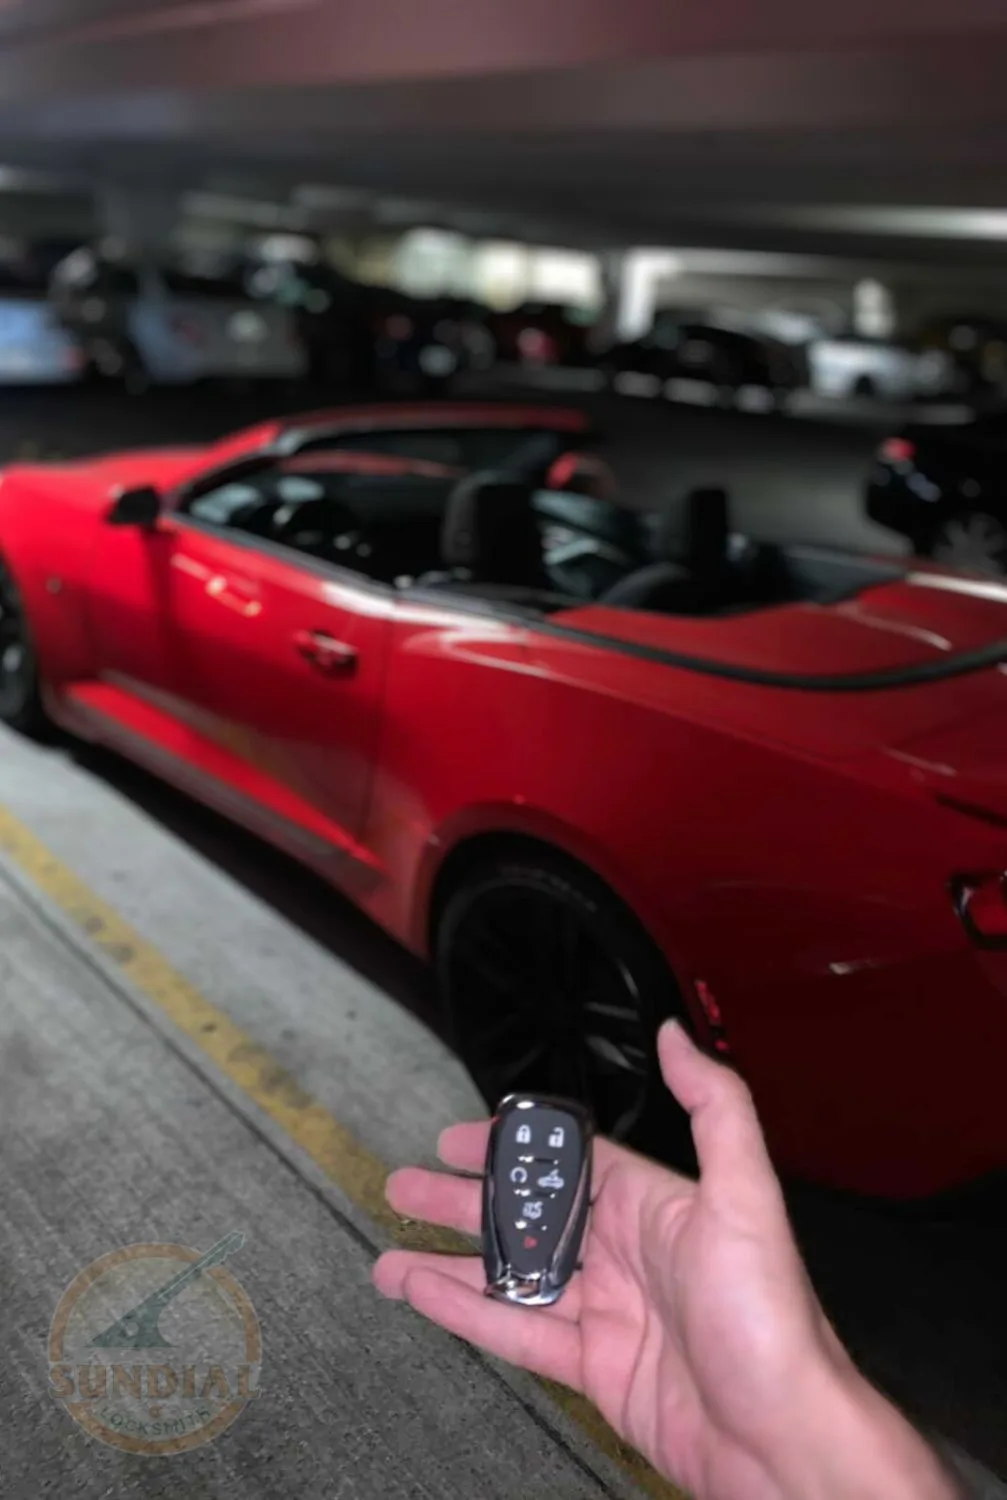 A hand presenting a car key fob against the background of a sleek red sports car at night.